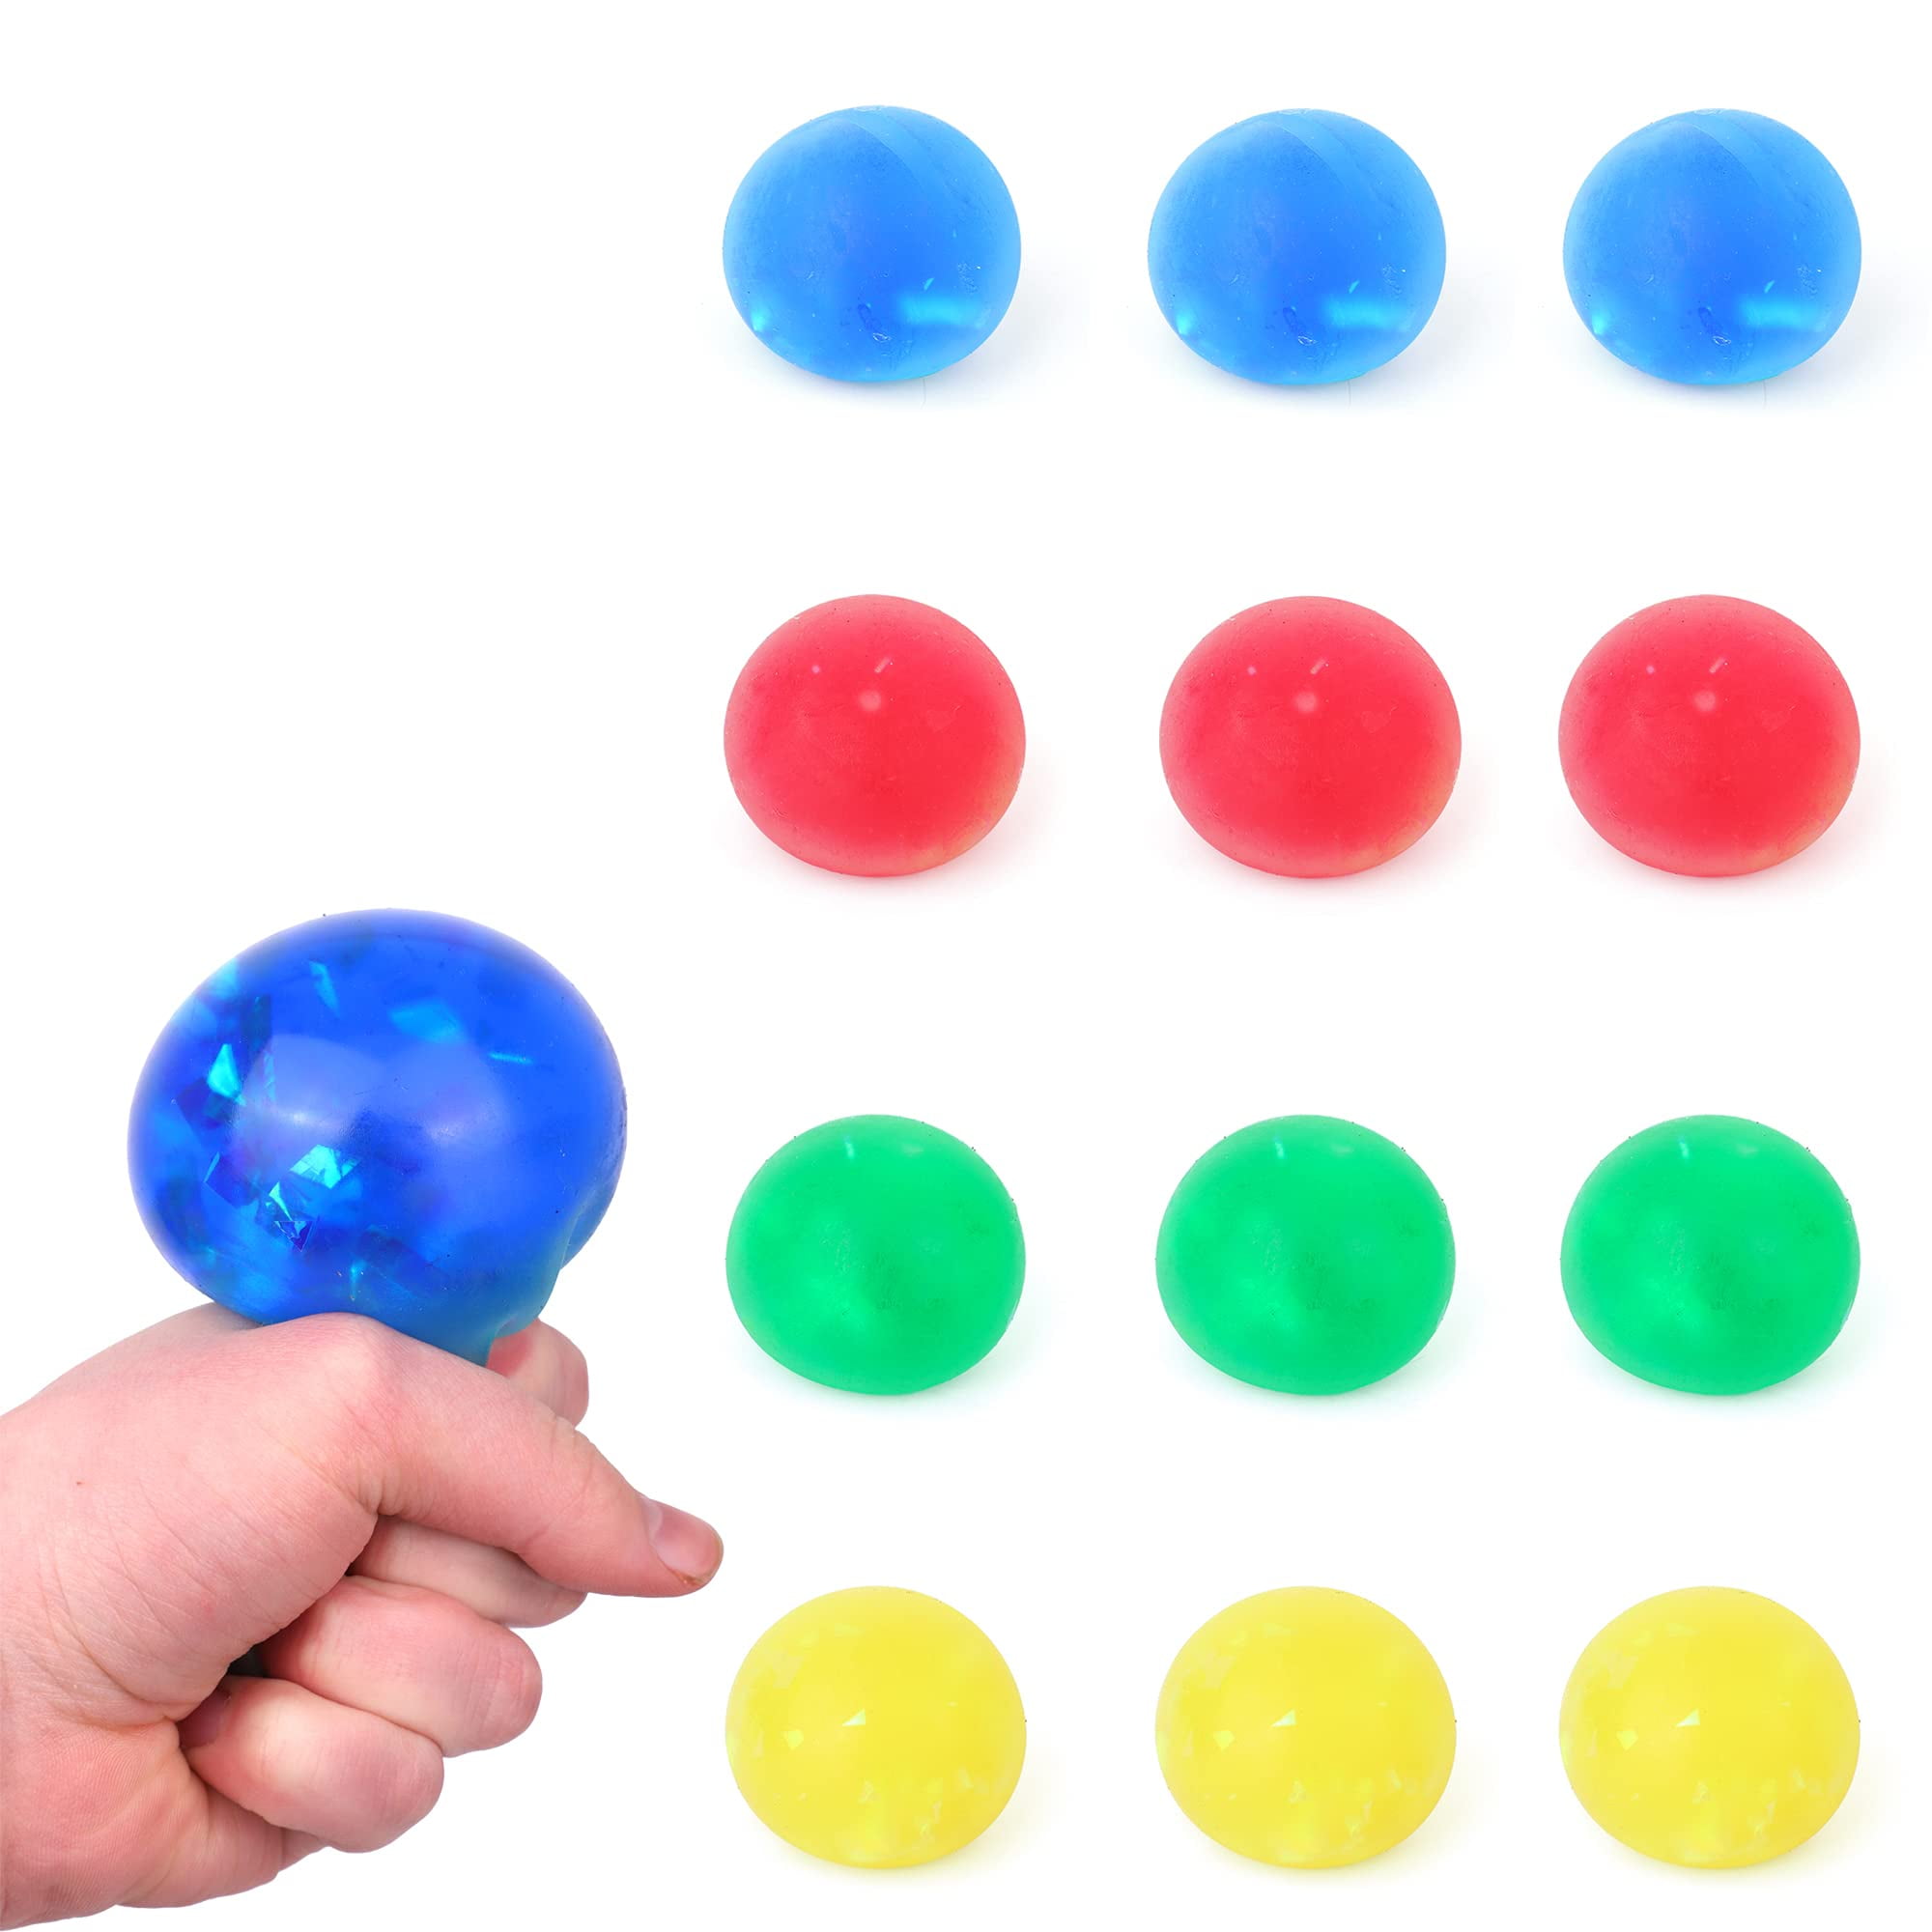 6 cm Mesh Sensory Stress Relief Toy Anxiety Autism Squeeze Ball For Adults kids. 